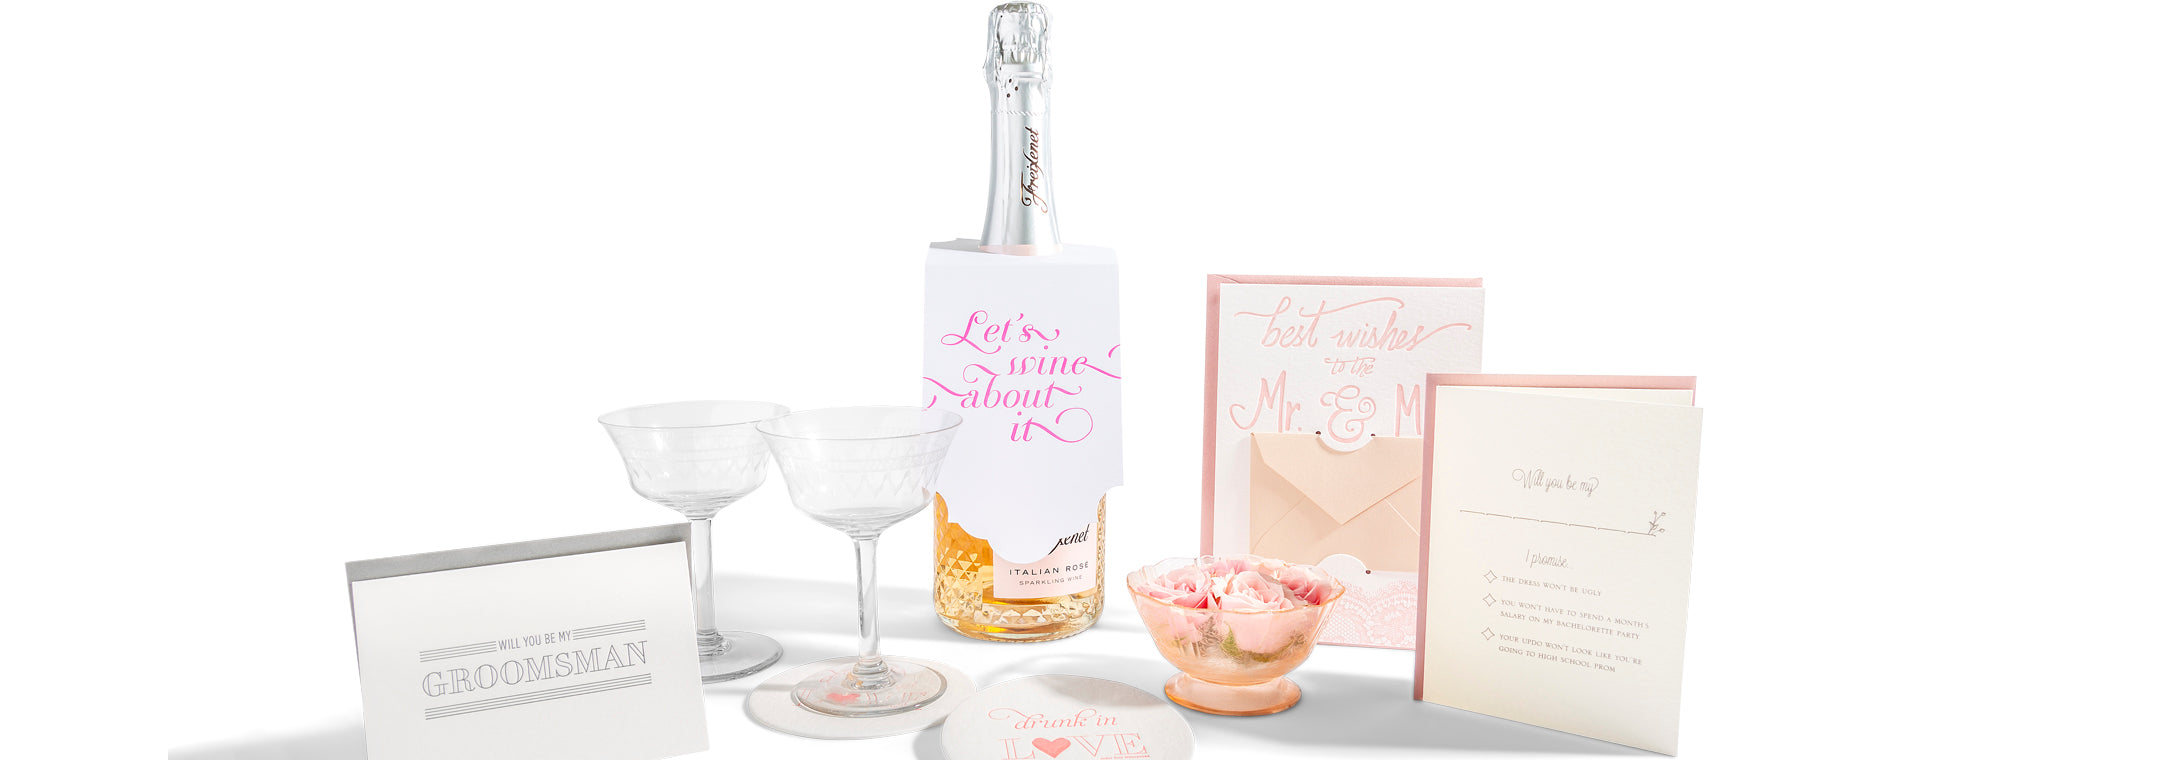 Gift Guides for the Bride & Groom